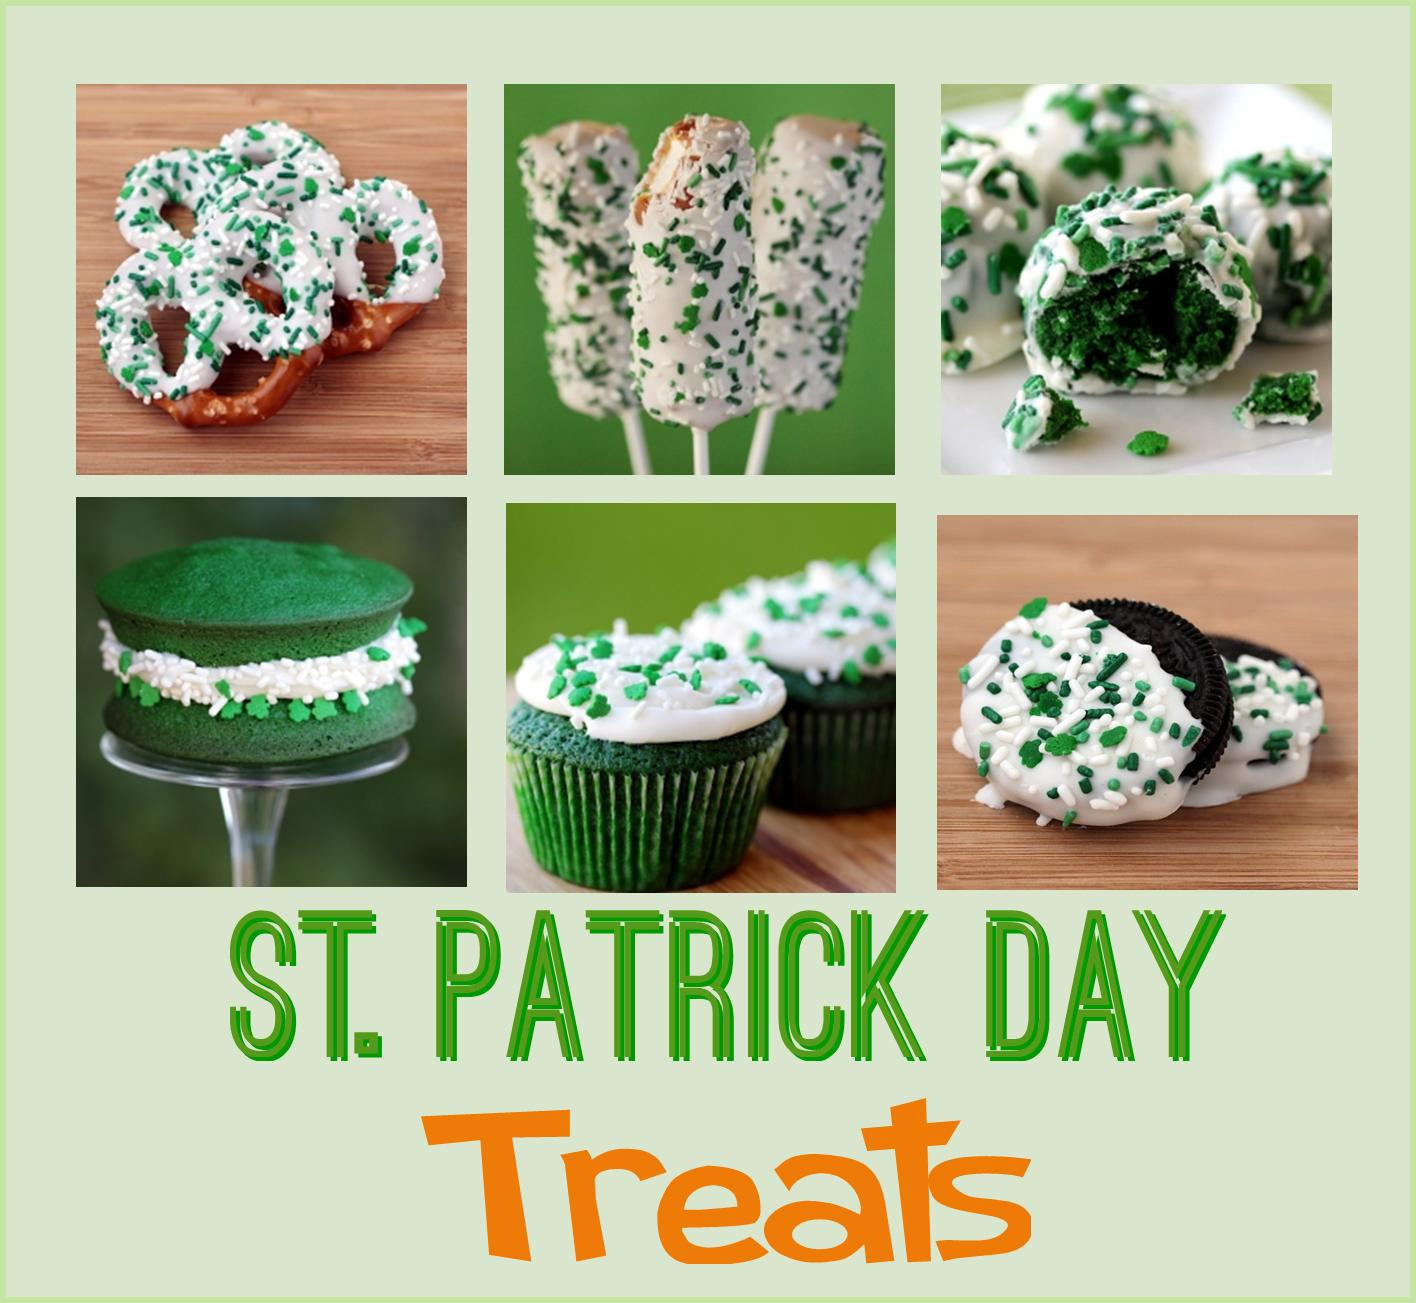 St Patrick's Day Cookies Ideas
 It s Written on the Wall Fun Ideas for St Patrick s Day